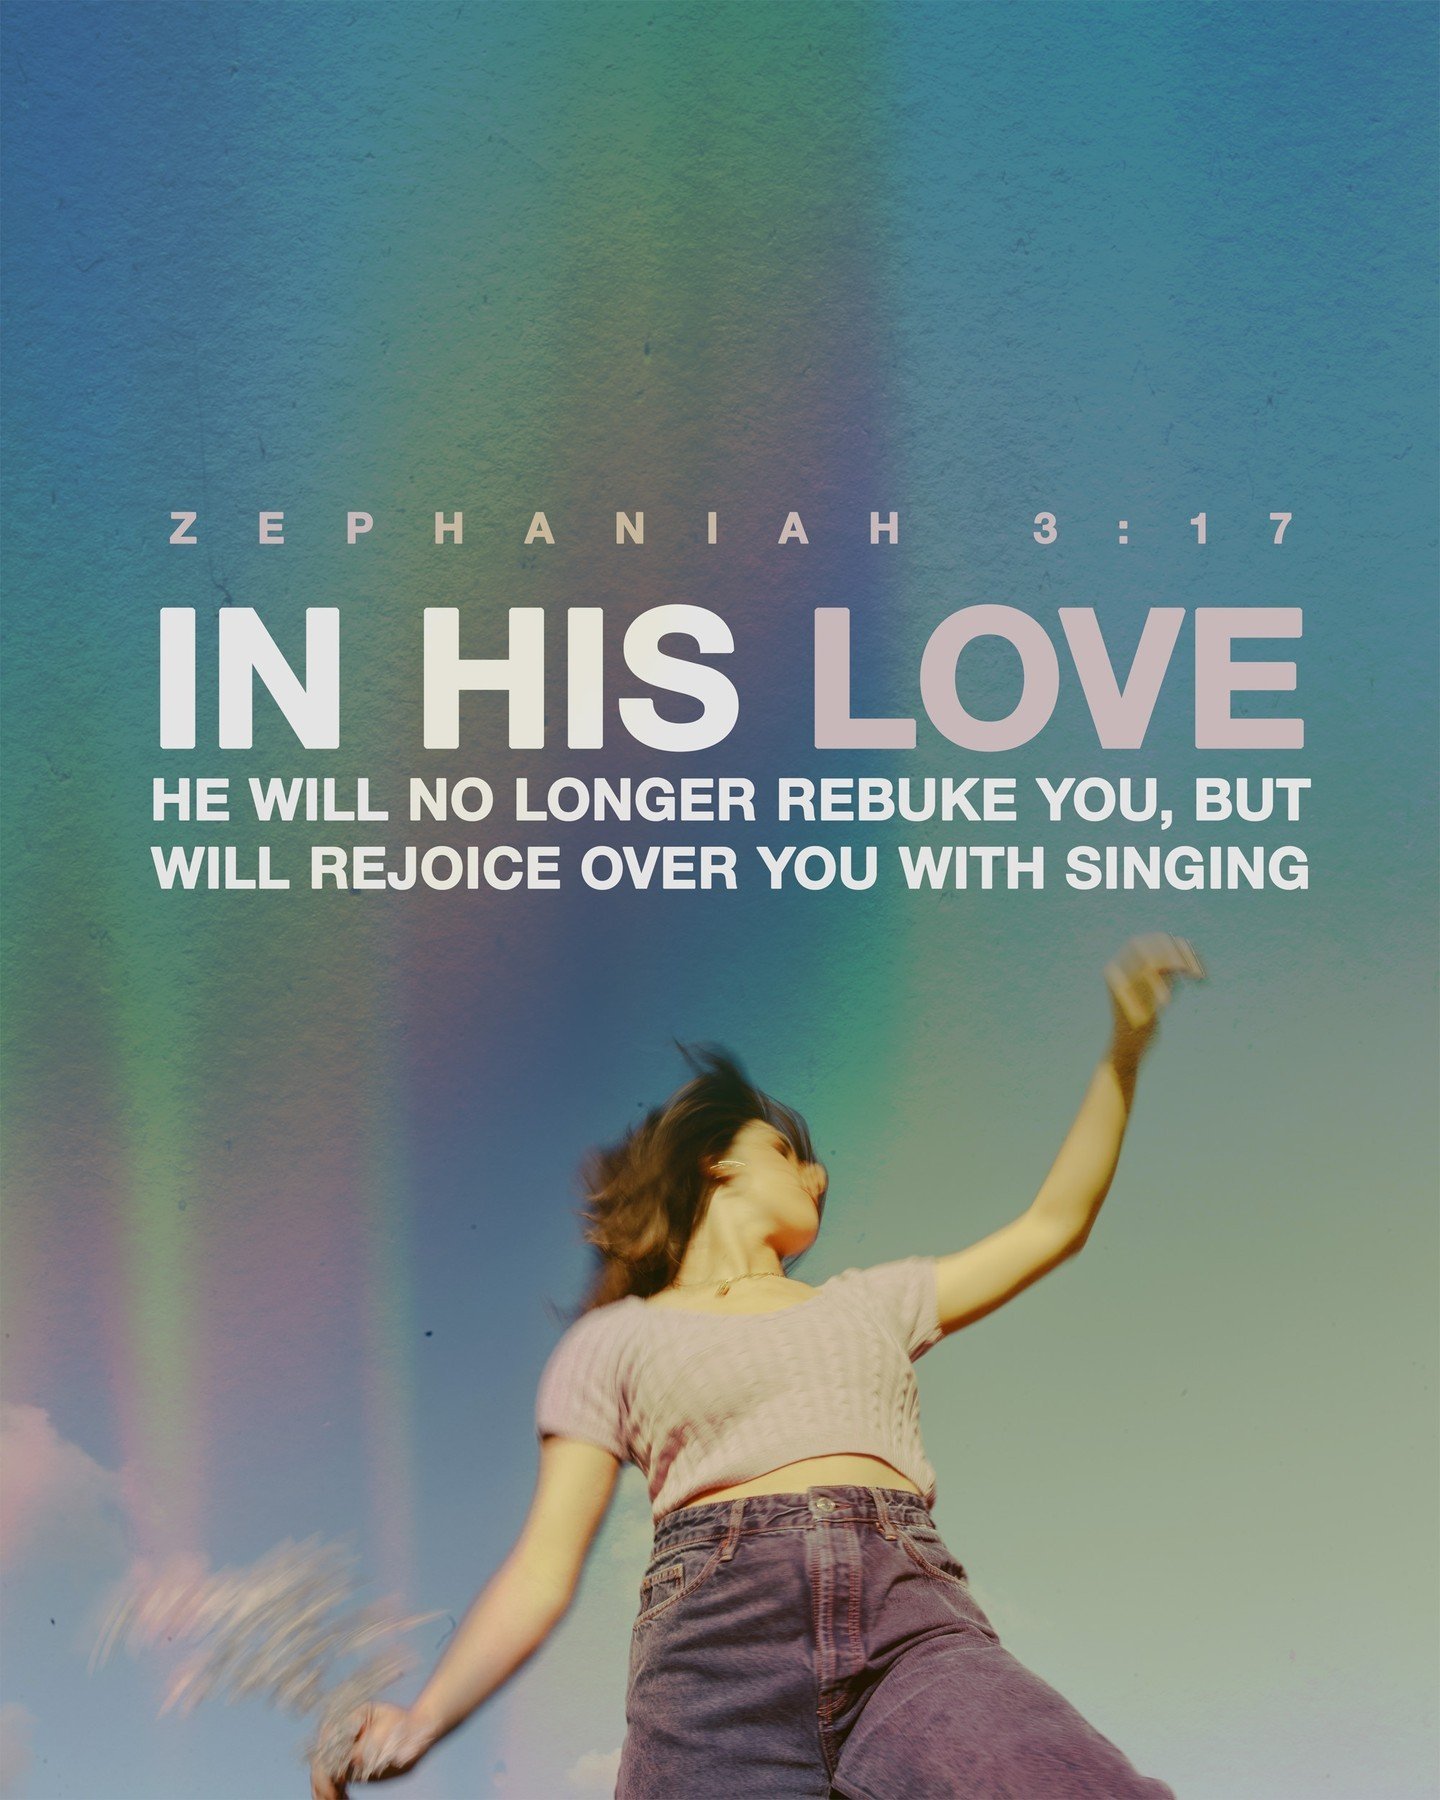 &quot;In his love he will no longer rebuke you, but will rejoice over you with singing.&quot; - Zephaniah 3:17
.
.
.
#church #god #morning #jesus #christ #love #christian #worship #bible #zephaniah